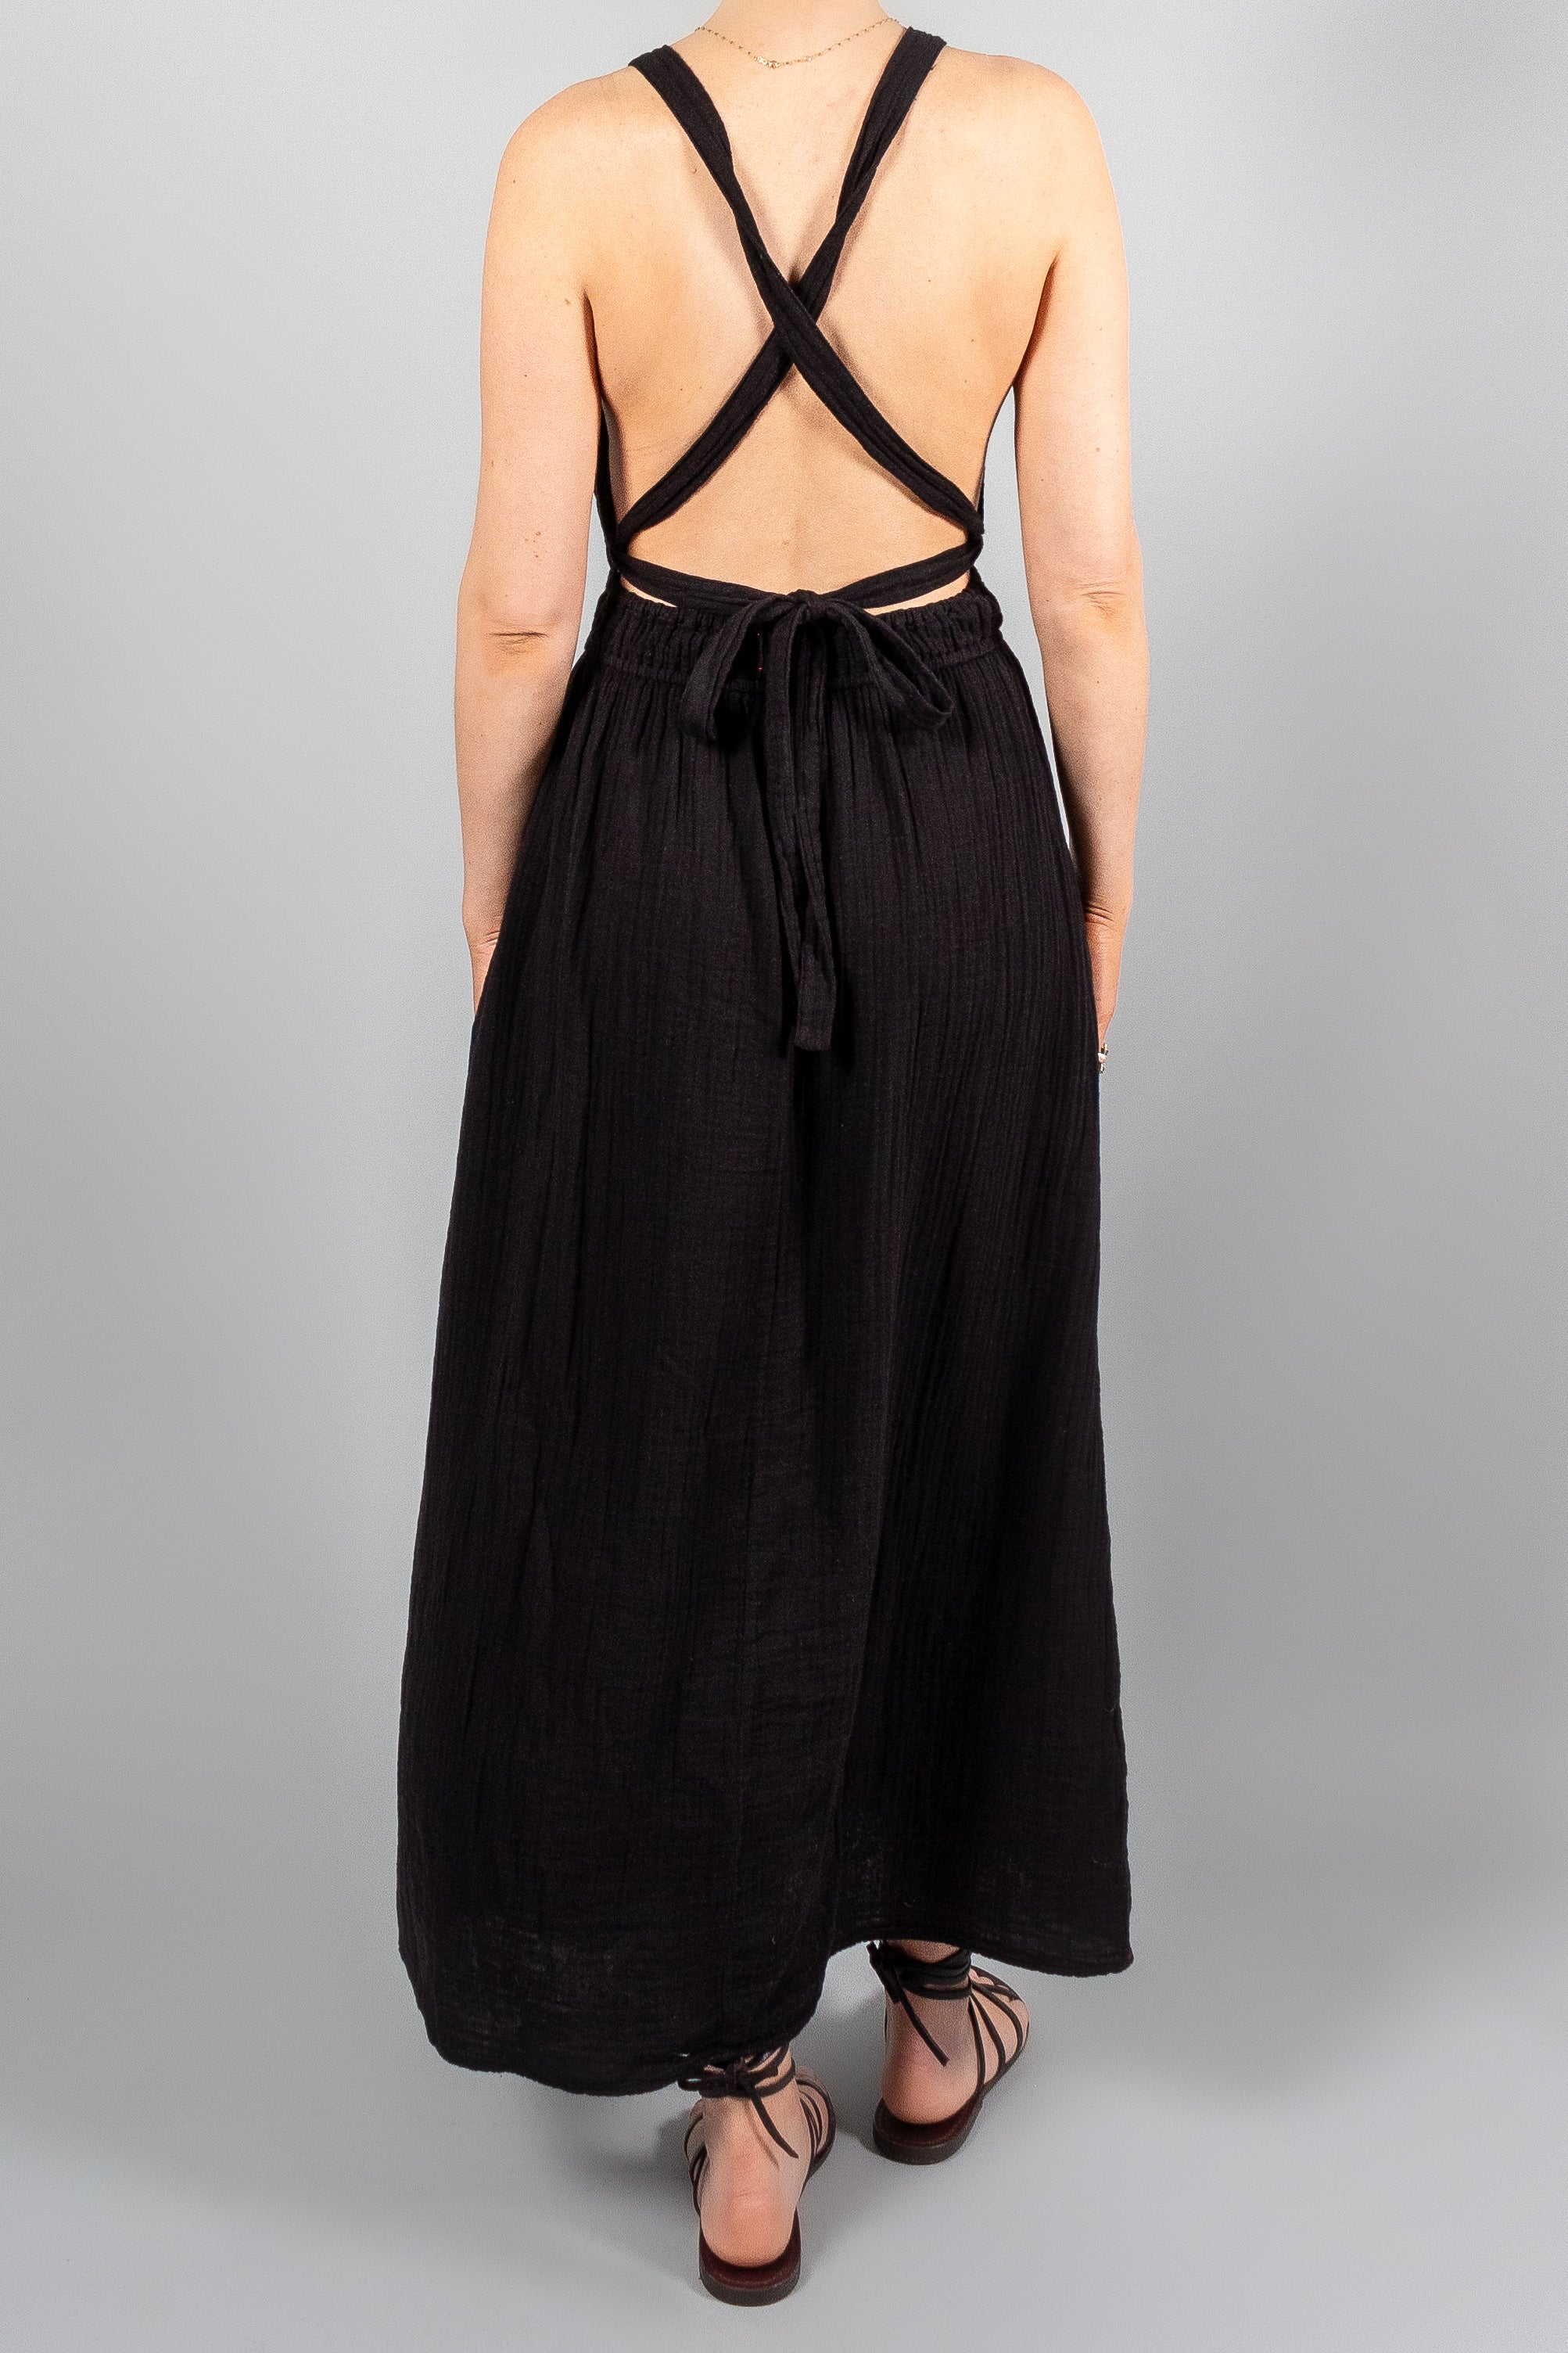 Xirena Sienna Dress-Dresses and Jumpsuits-Misch-Boutique-Vancouver-Canada-misch.ca